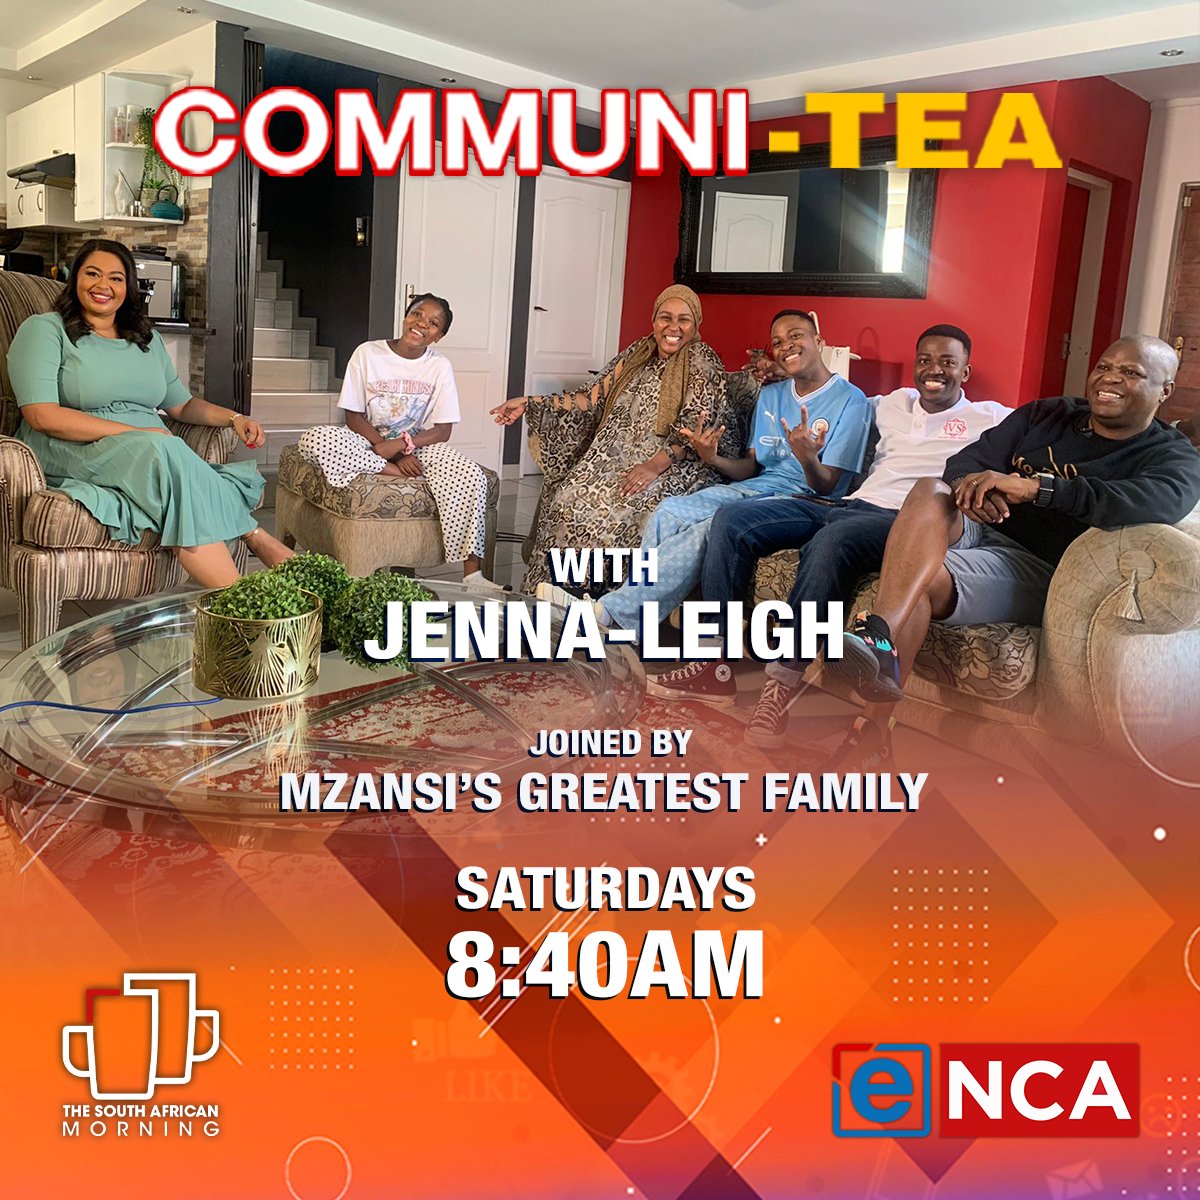 Hi fam, don't miss out 👌 Mzansi’s Greatest family @eNCA with @LadyBilong 8:40am 💖💖